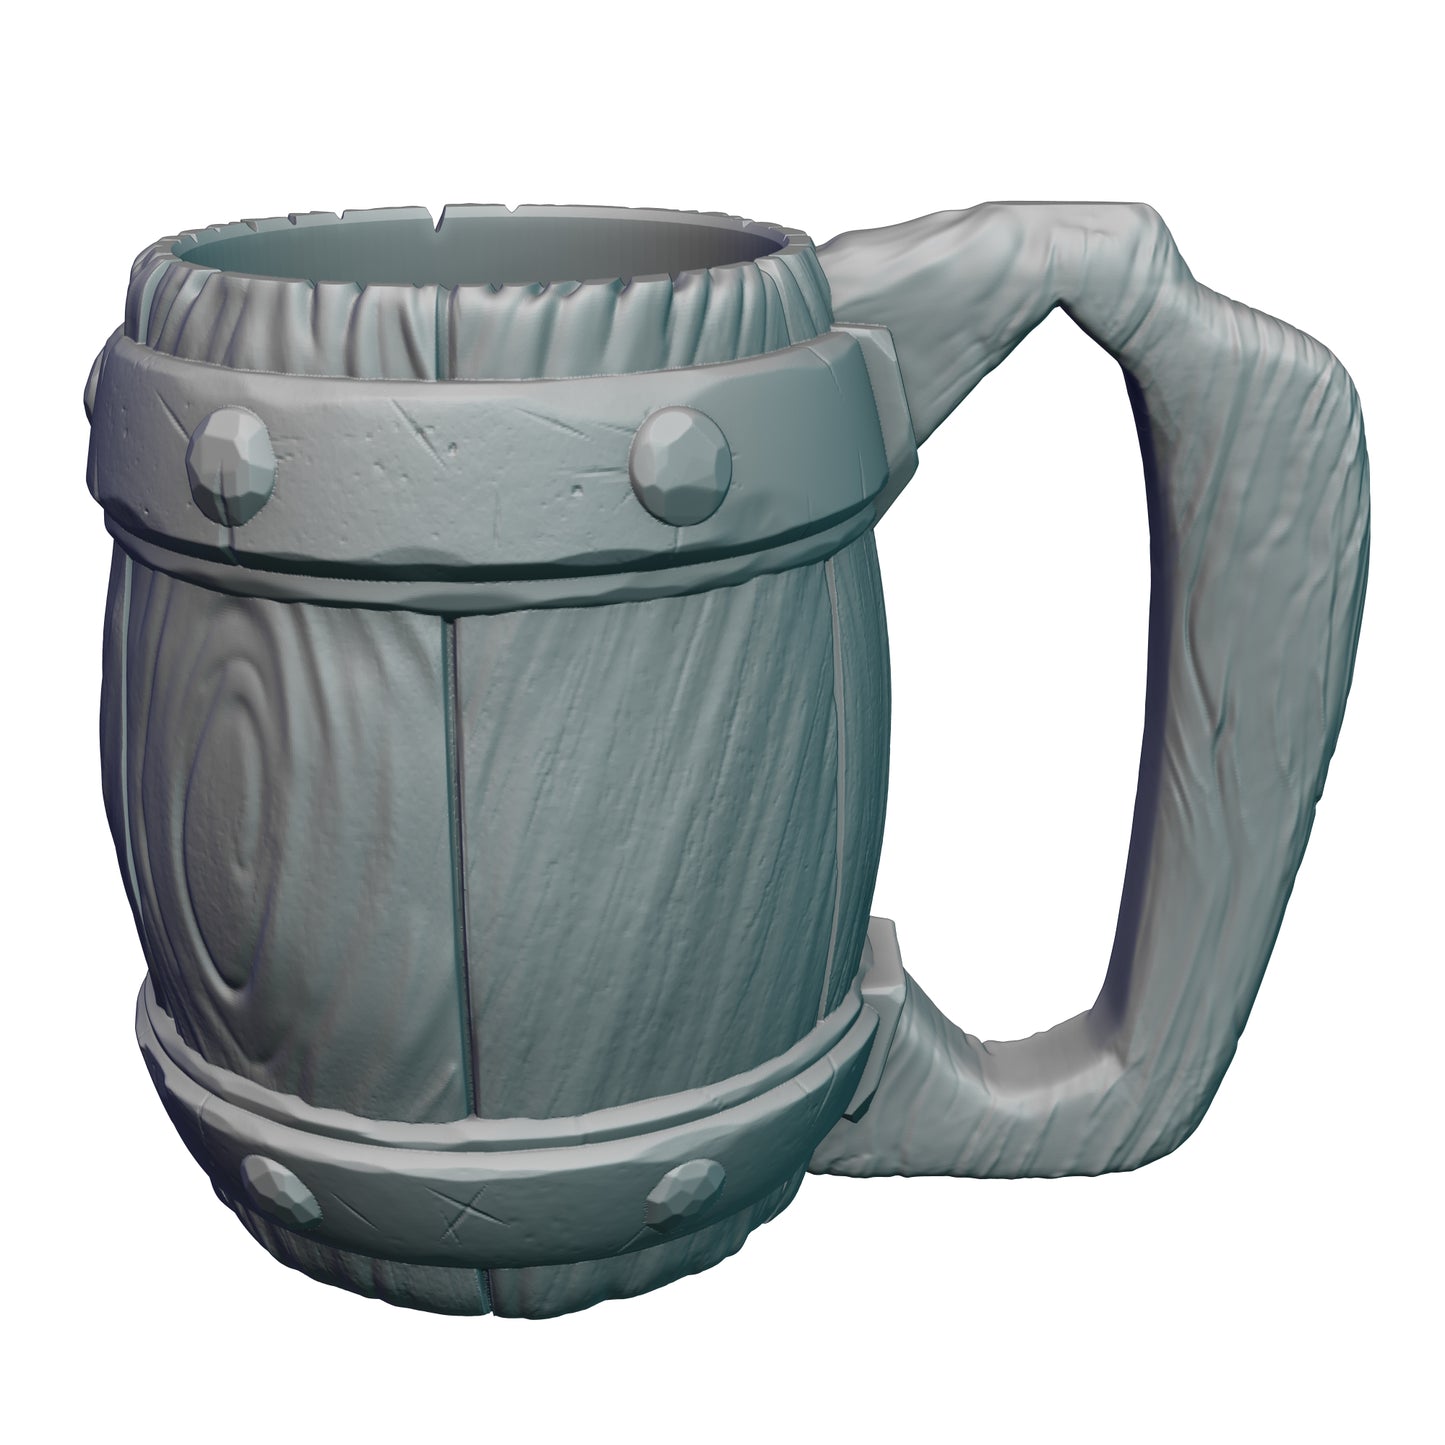 Tavern Gaming Mug with Twist-Off Cover: Dual-Purpose Dice and Beverage Can Holder